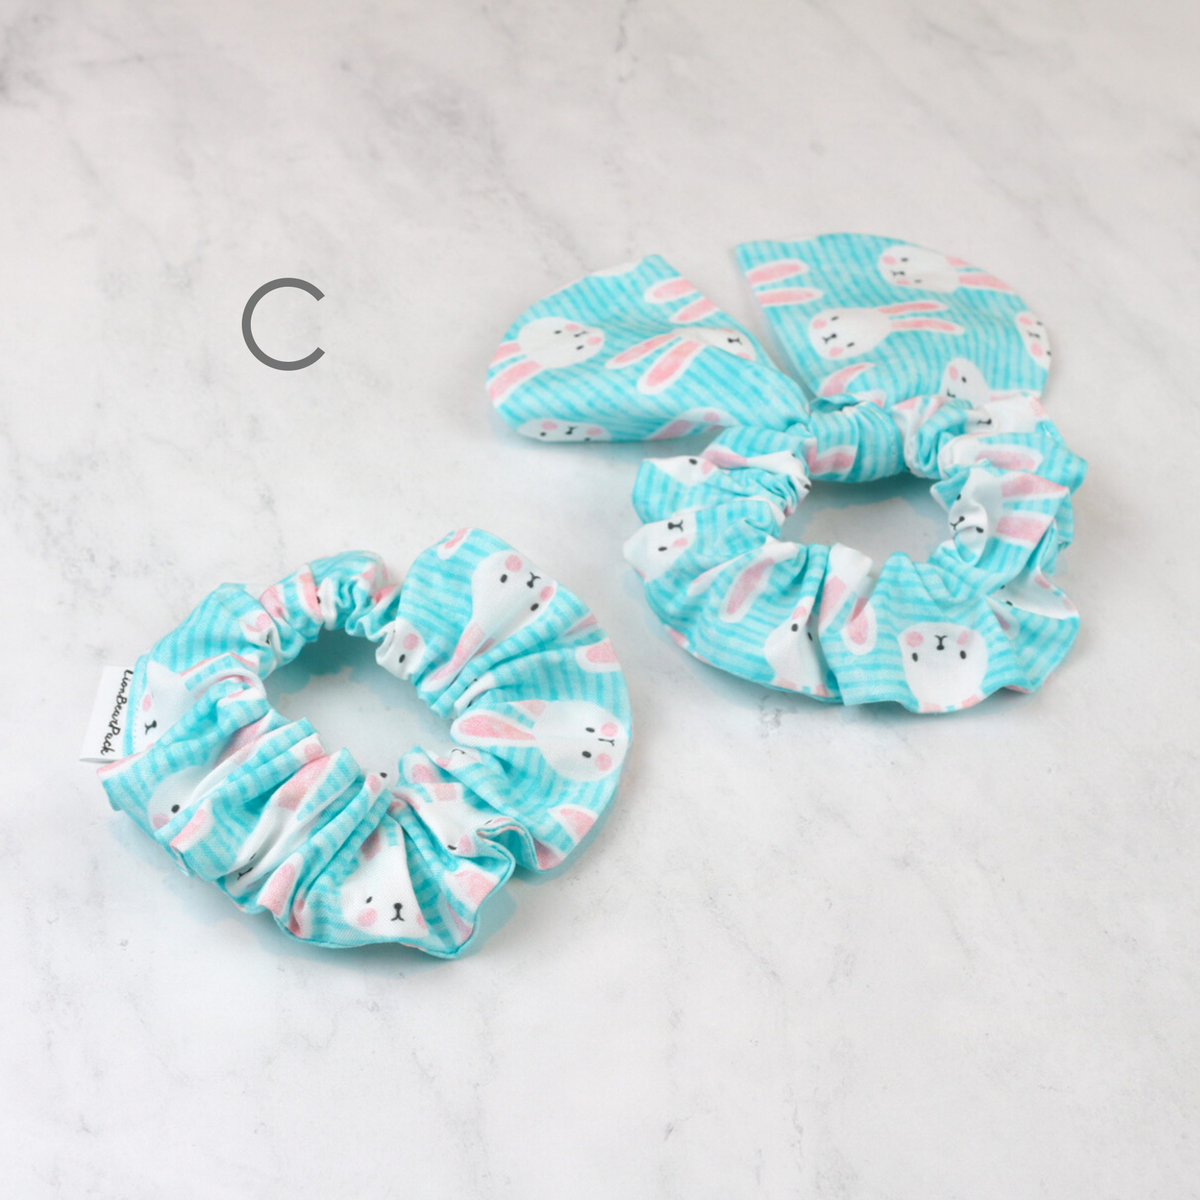 Easter Scrunchies Pack Sets I Pick Your Own Set